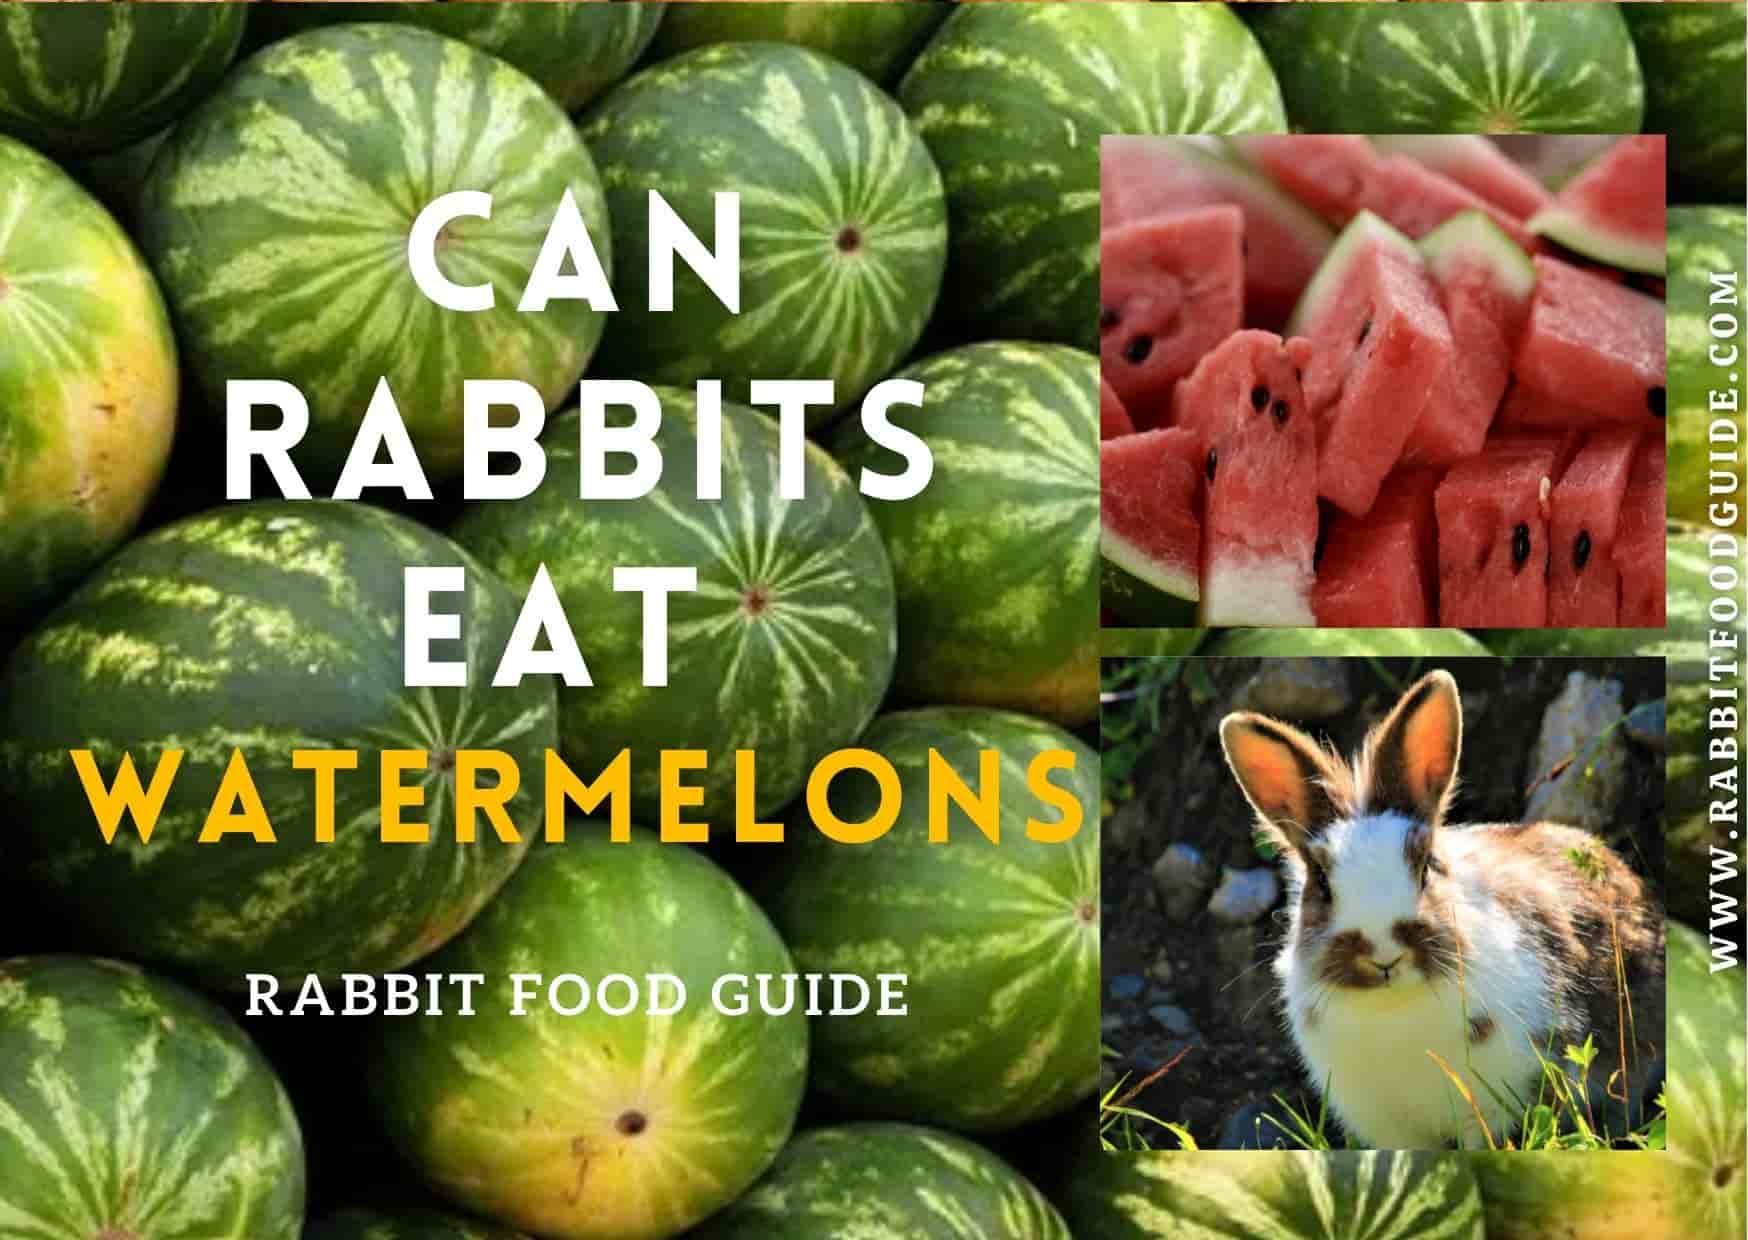 Can rabbits eat watermelons?